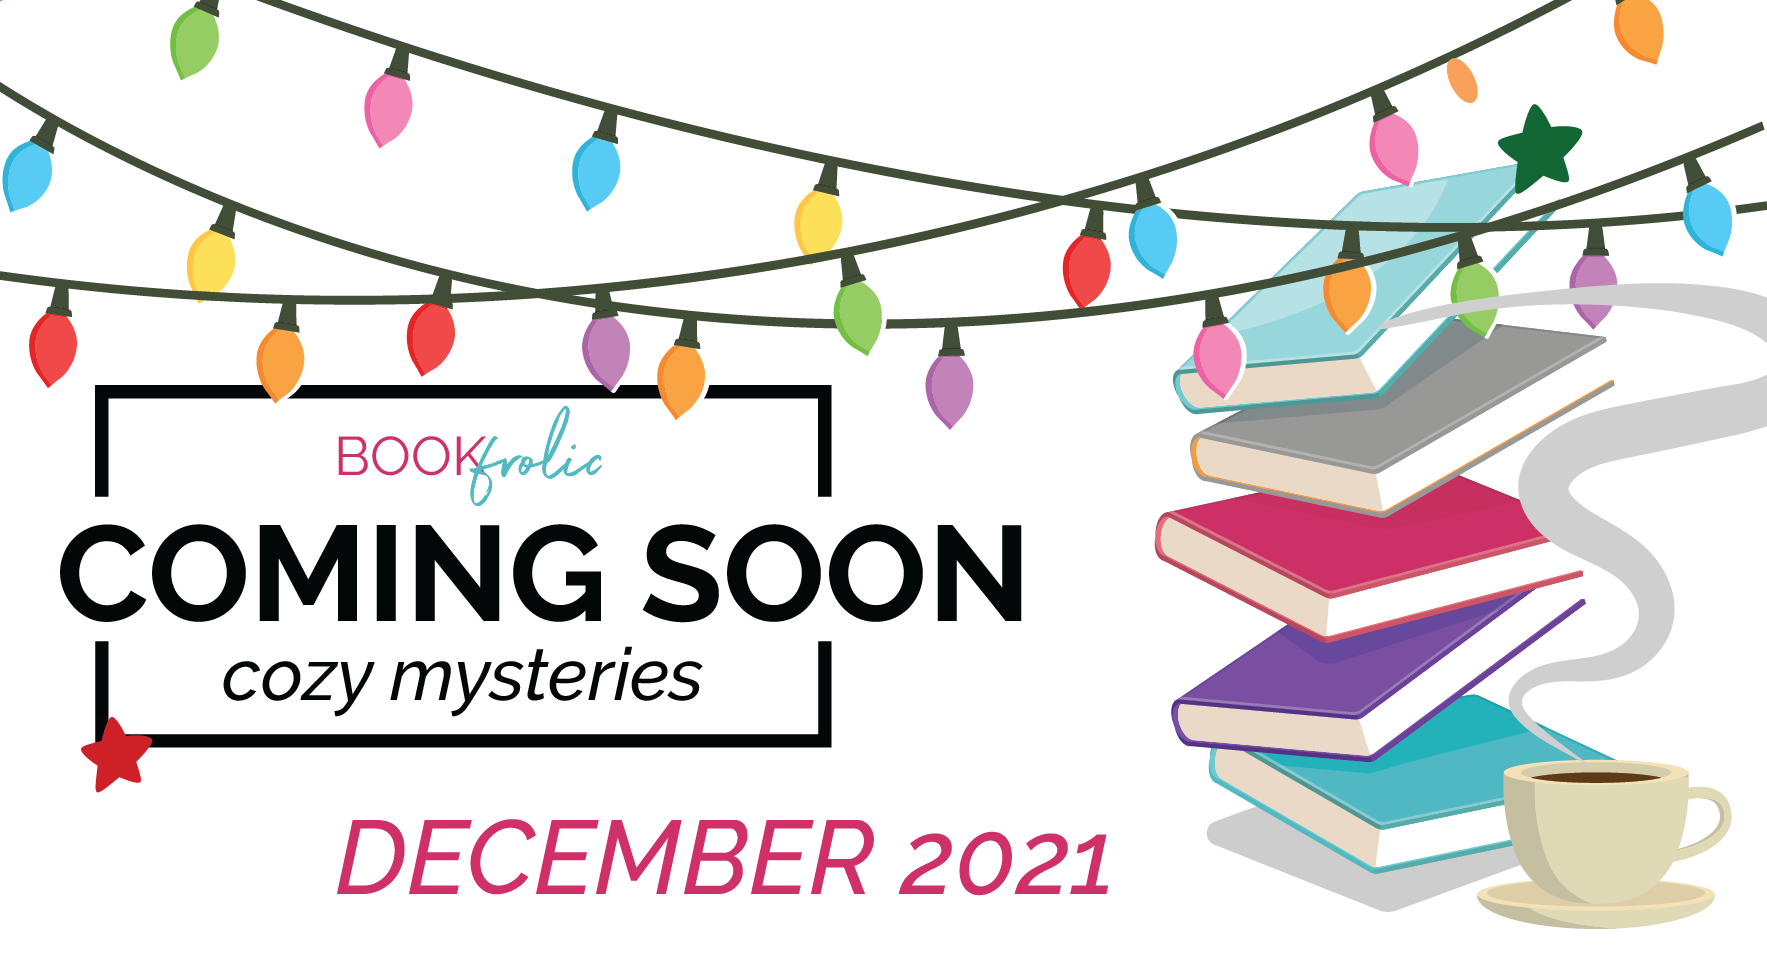 Coming soon - cozy mystery new releases for December 2021